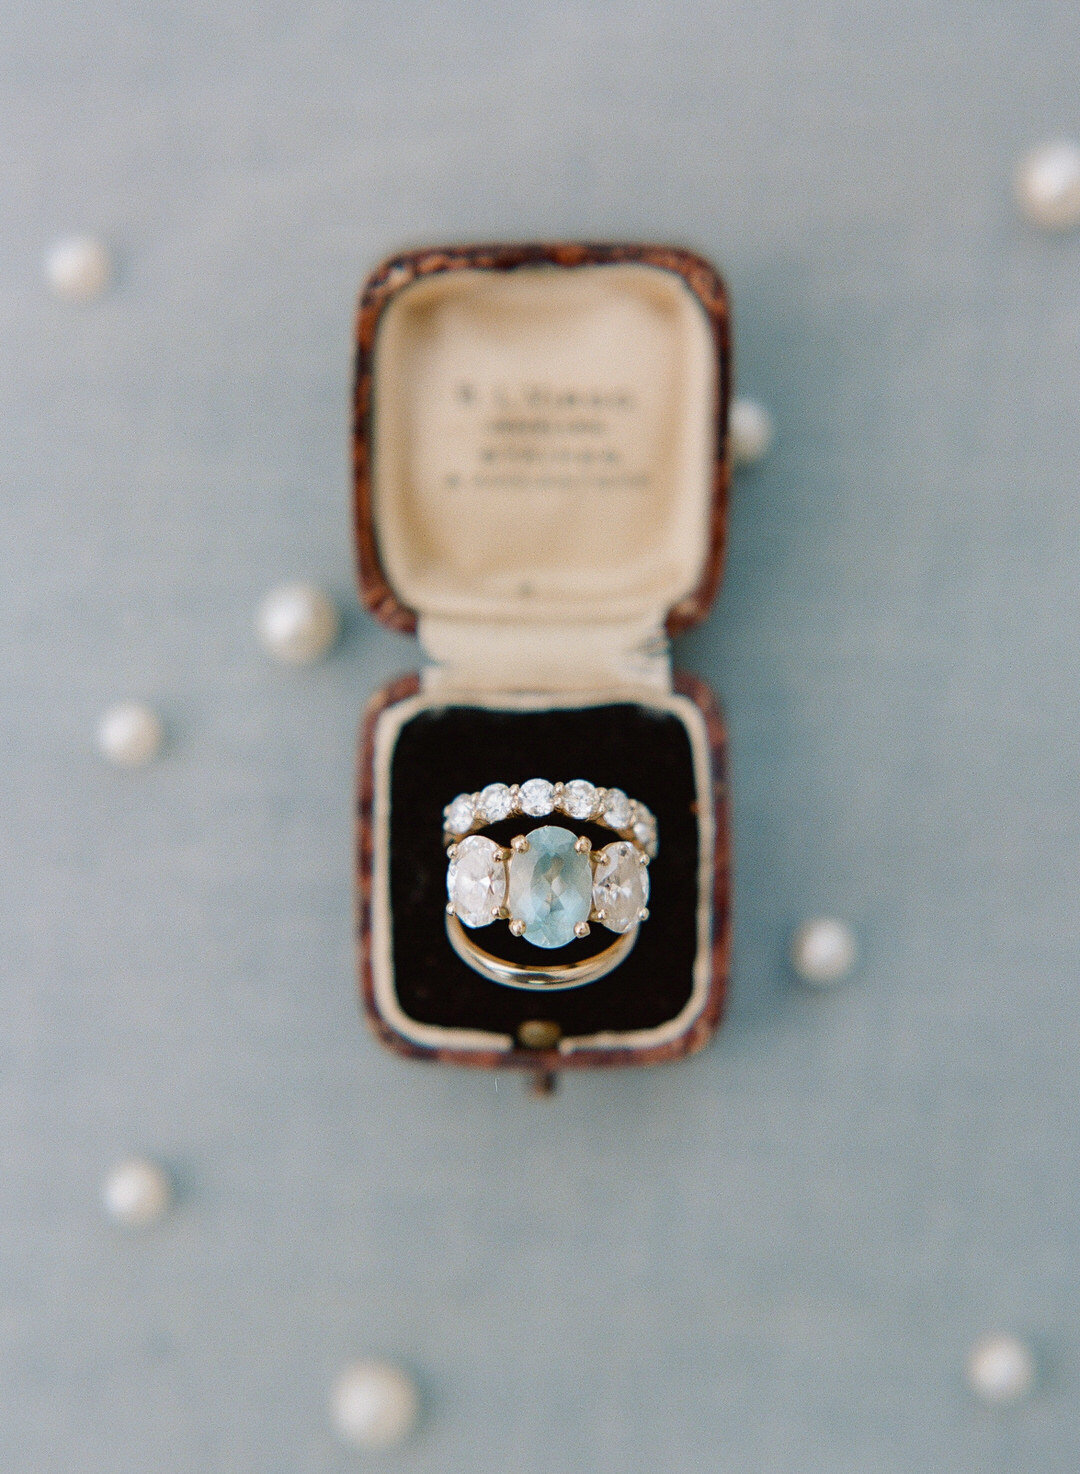 Engagement Ring and Wedding Rings in vintage ring box